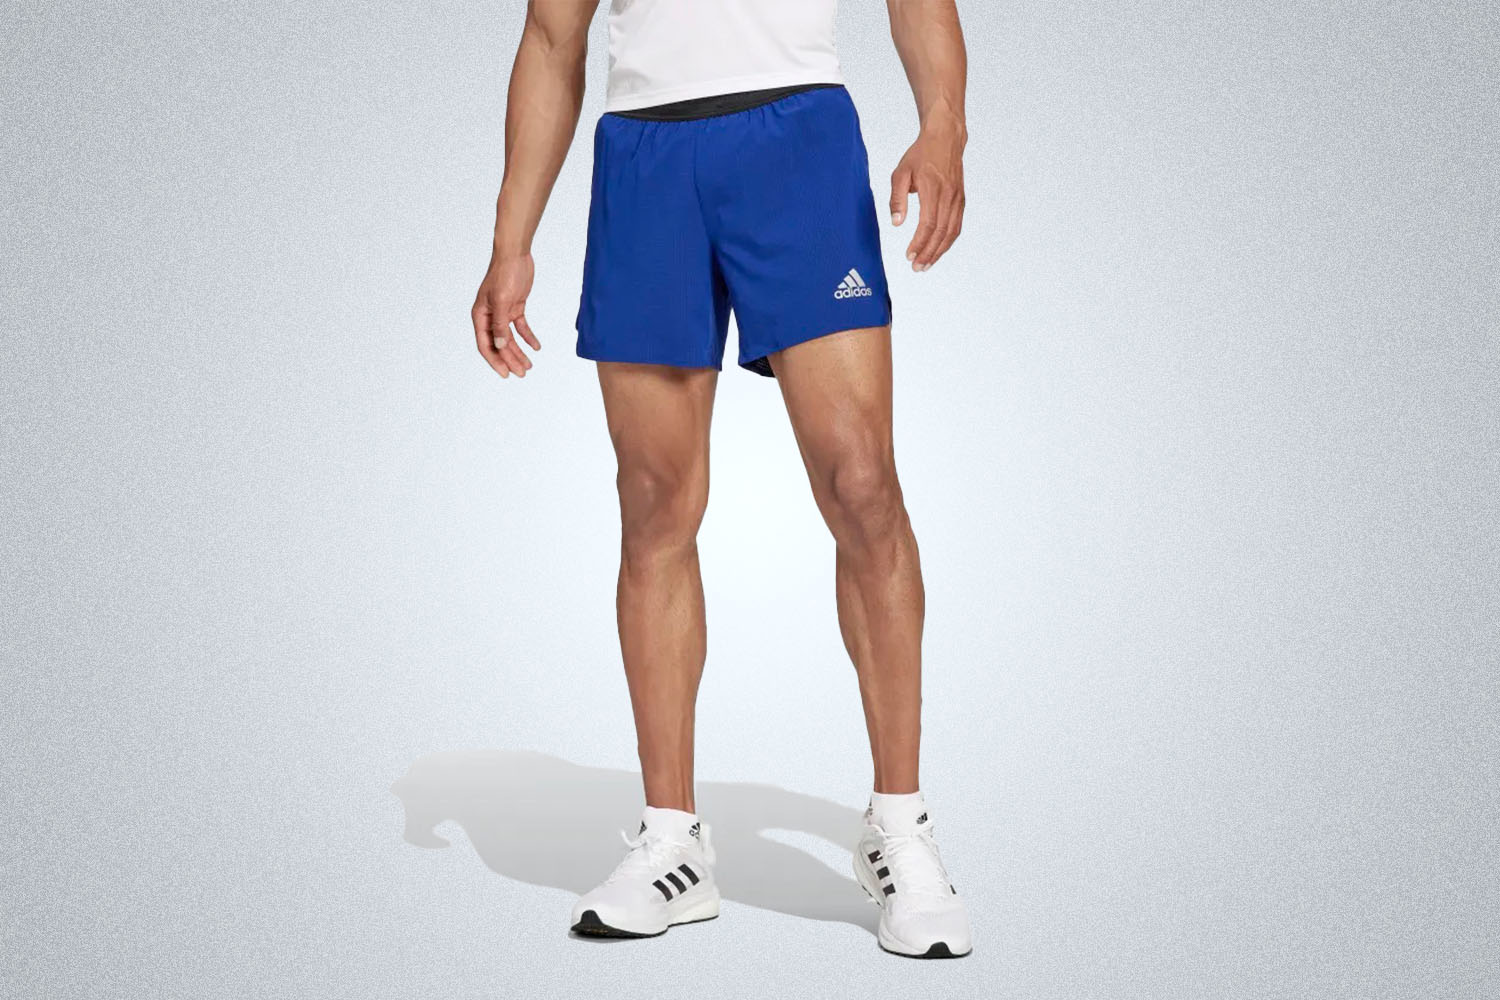 a model in a pair of blue running shorts from Adidas on a grey background